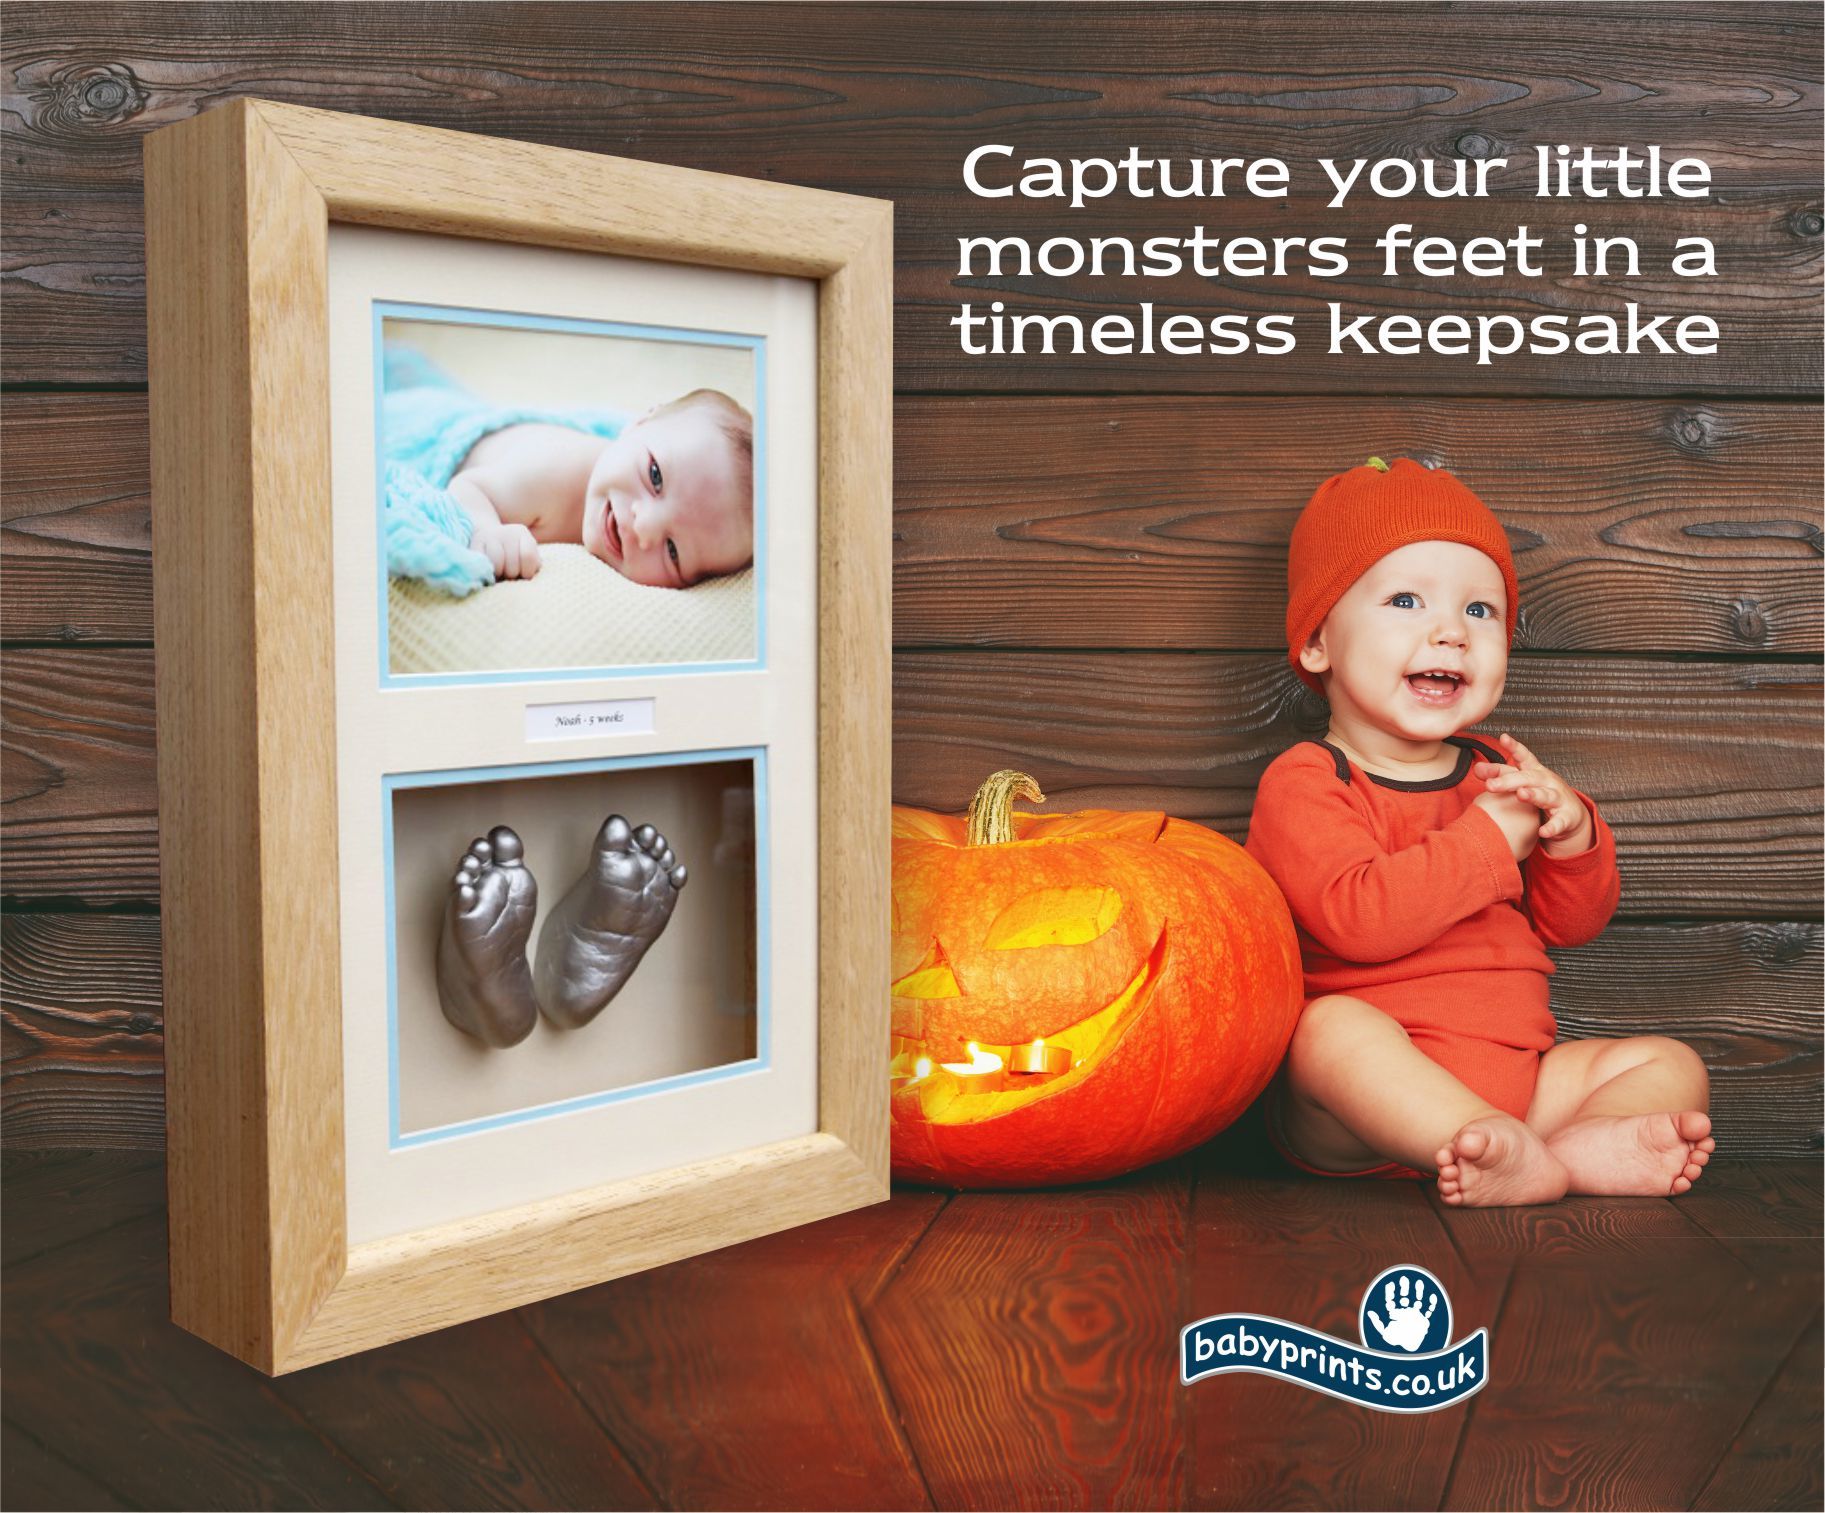 Capture your little monsters feet